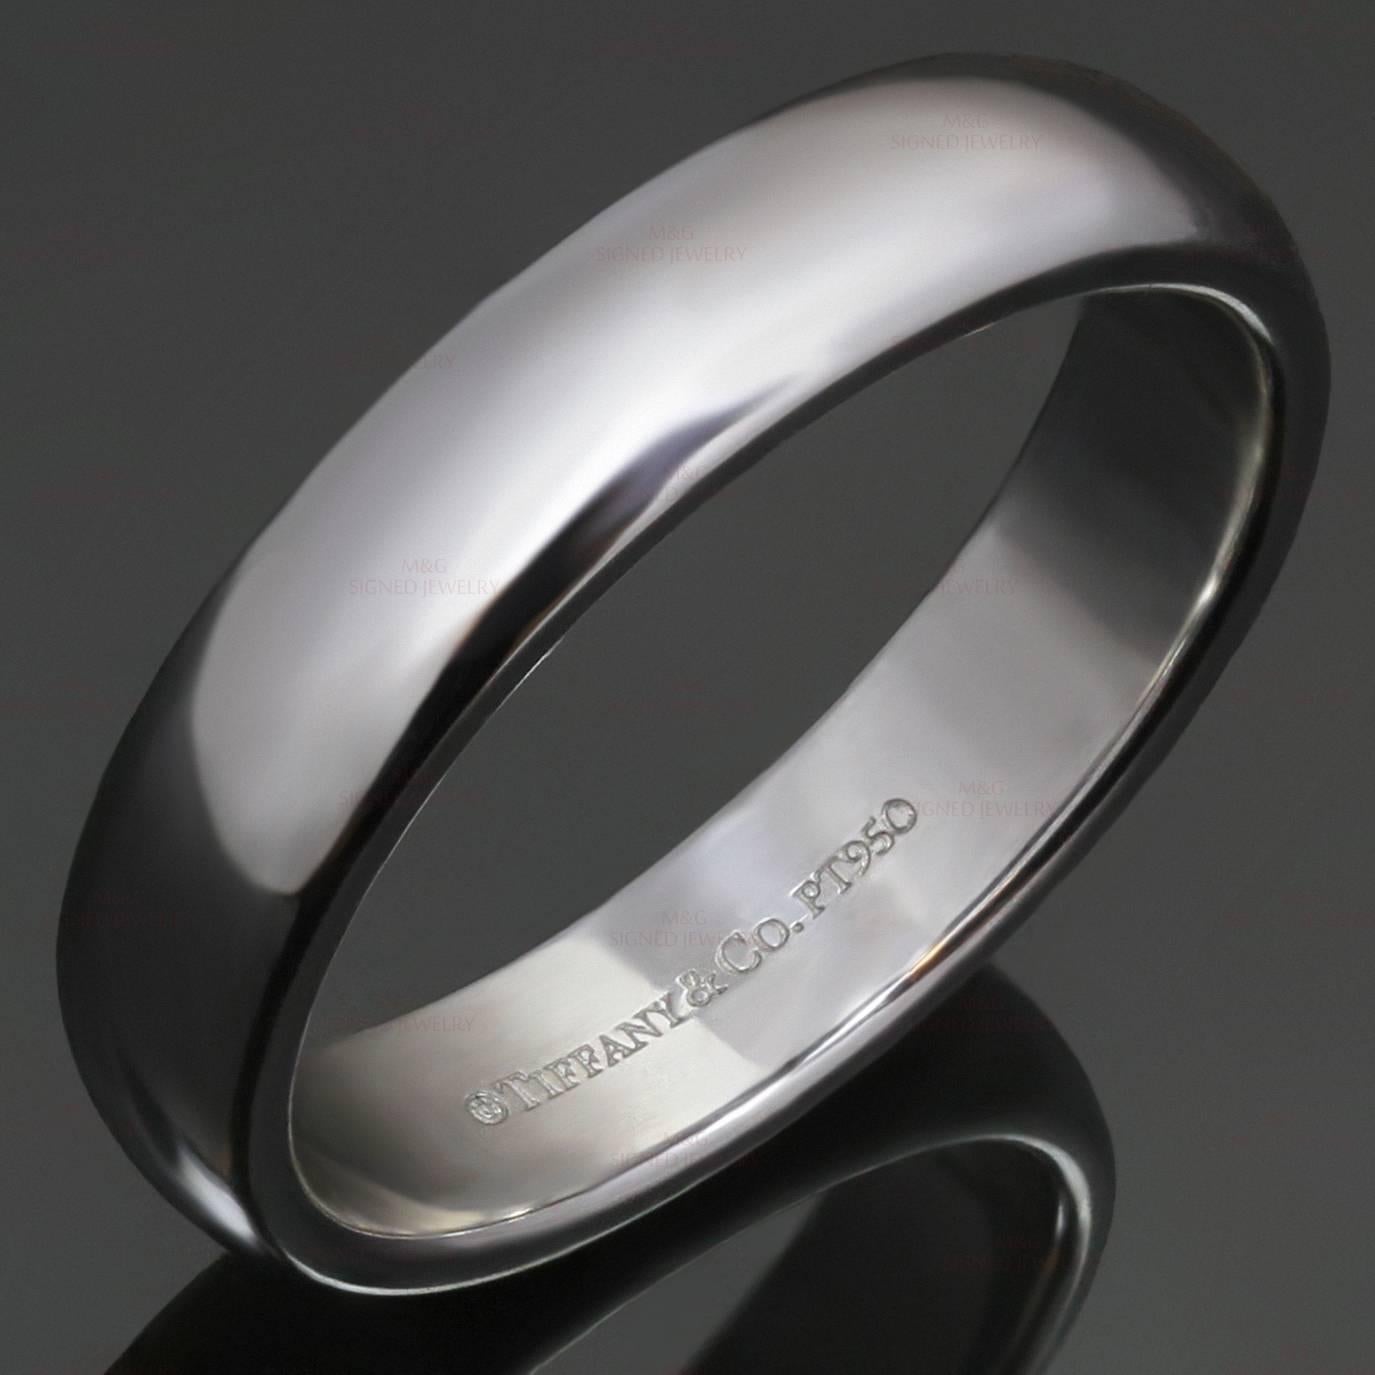 This classic wedding band by Tiffany & Co. is crafted in platinum. Made in United States circa 2010s. Measurements: 0.15